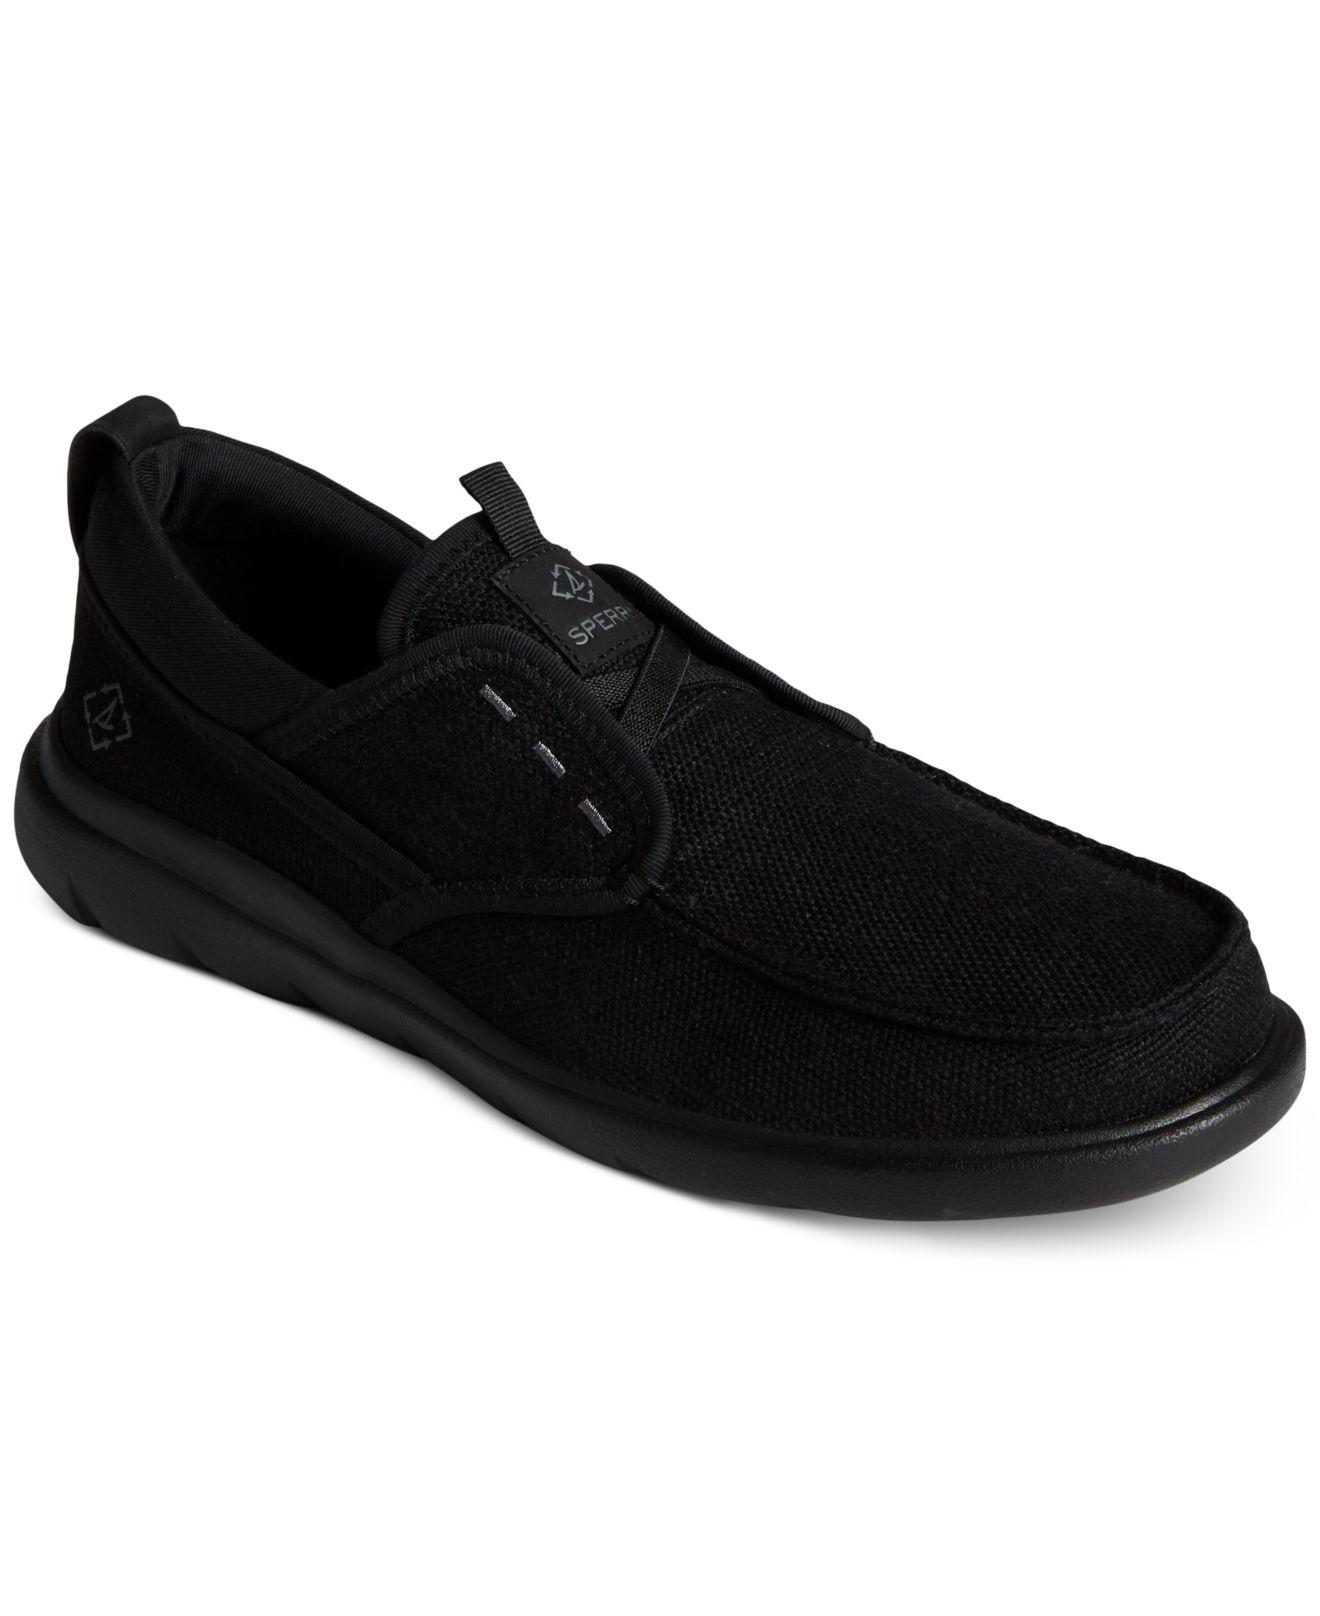 Sperry Top-Sider Seacycled? Captain's Moc Baja Boat Shoes in Black for ...